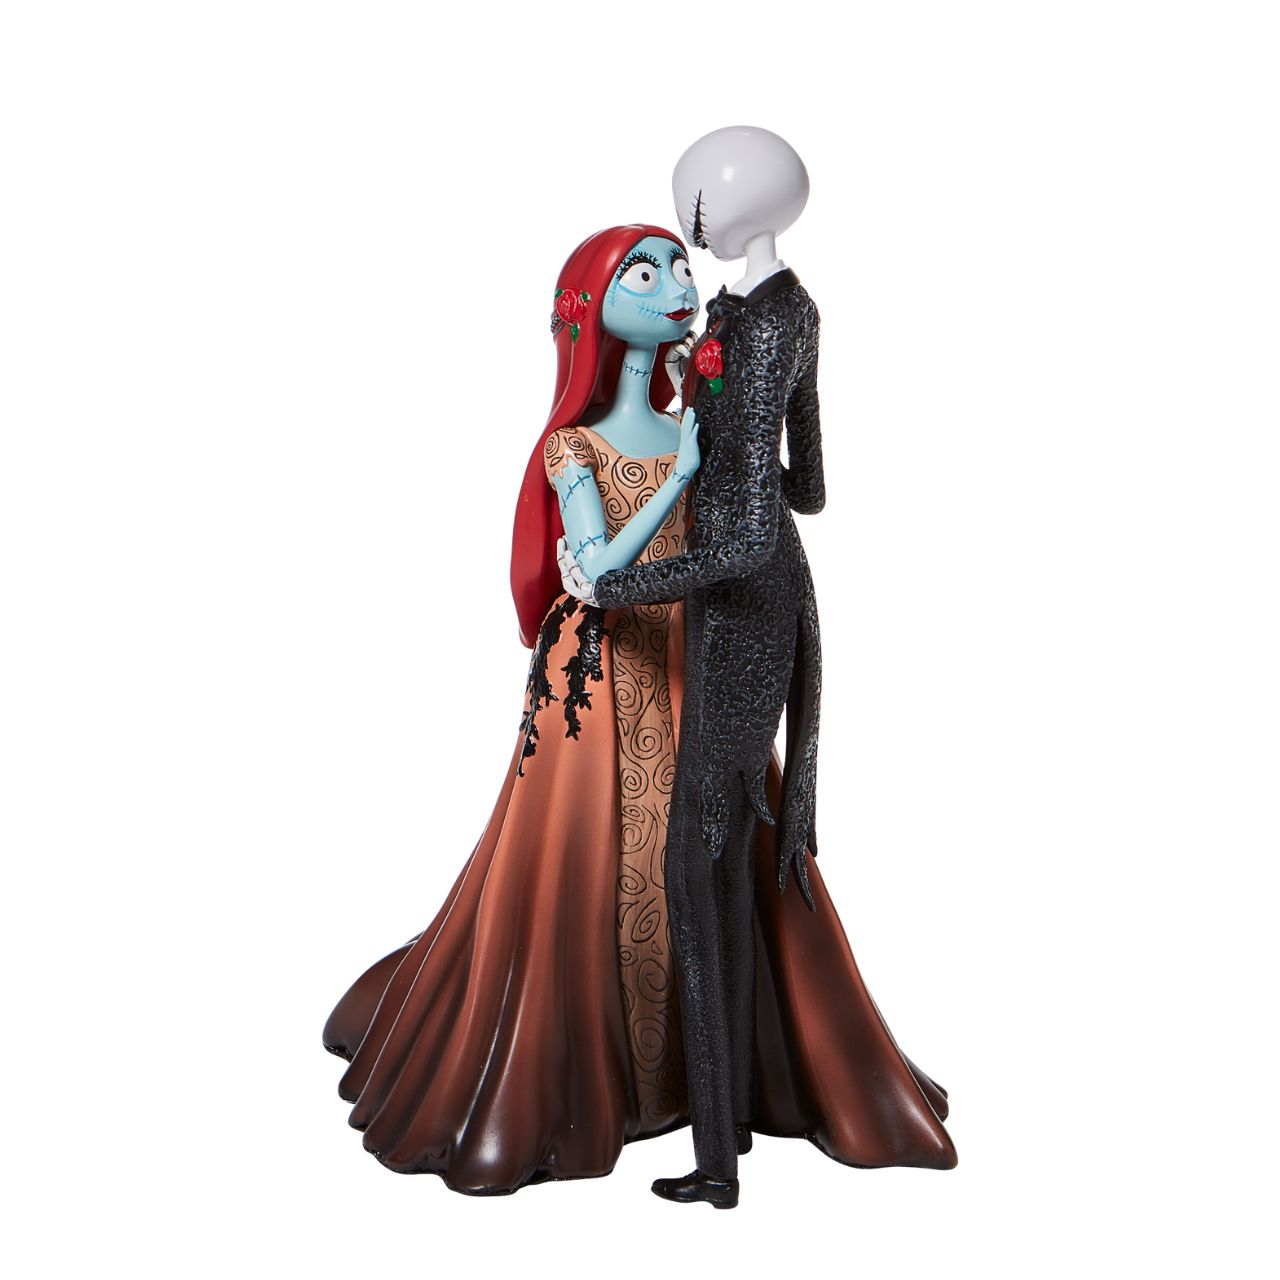 Disney Showcase Jack and Sally Couture de Force Figurine  Jack and Sally are an unlikely coupling of precious proportions. The Skellington king and ragdoll lock eyes in a romantic embrace in this show stopping Couture de Force Disney showcase piece. Wearing elegant robes, the pair prepare to dance the night away.